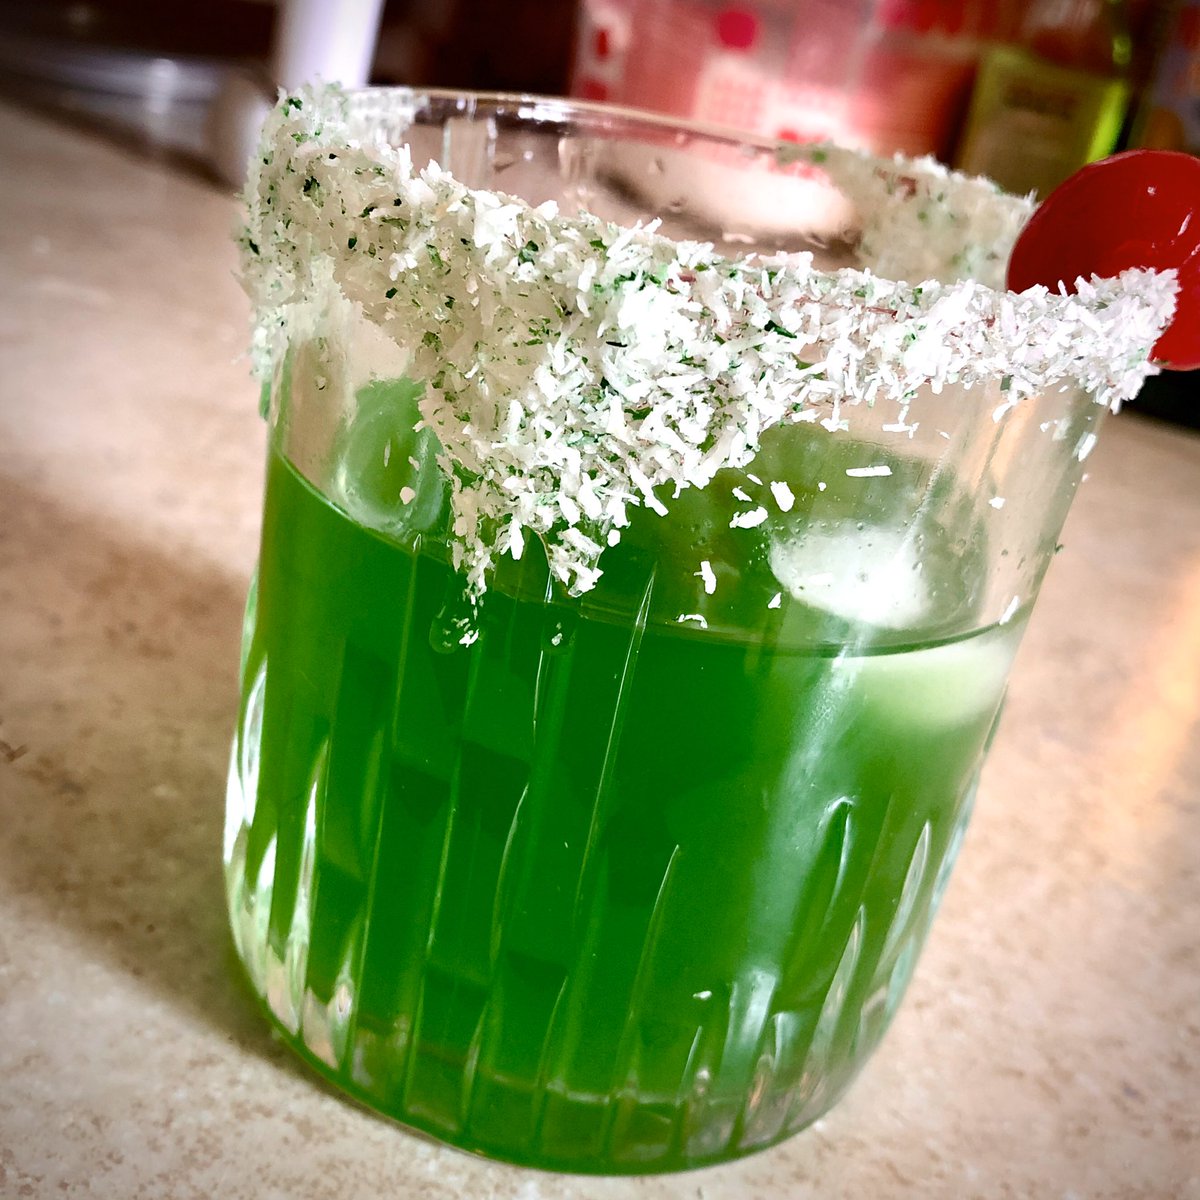 Ok so before I start cooking I need a drink and like I said, I don’t smoke so all I can do is make a green drink. I call this QuaranGREEN. I did not measure a damn thing but I did save video clips of me pouring in a measuring cup because I thought of you guys  thread below